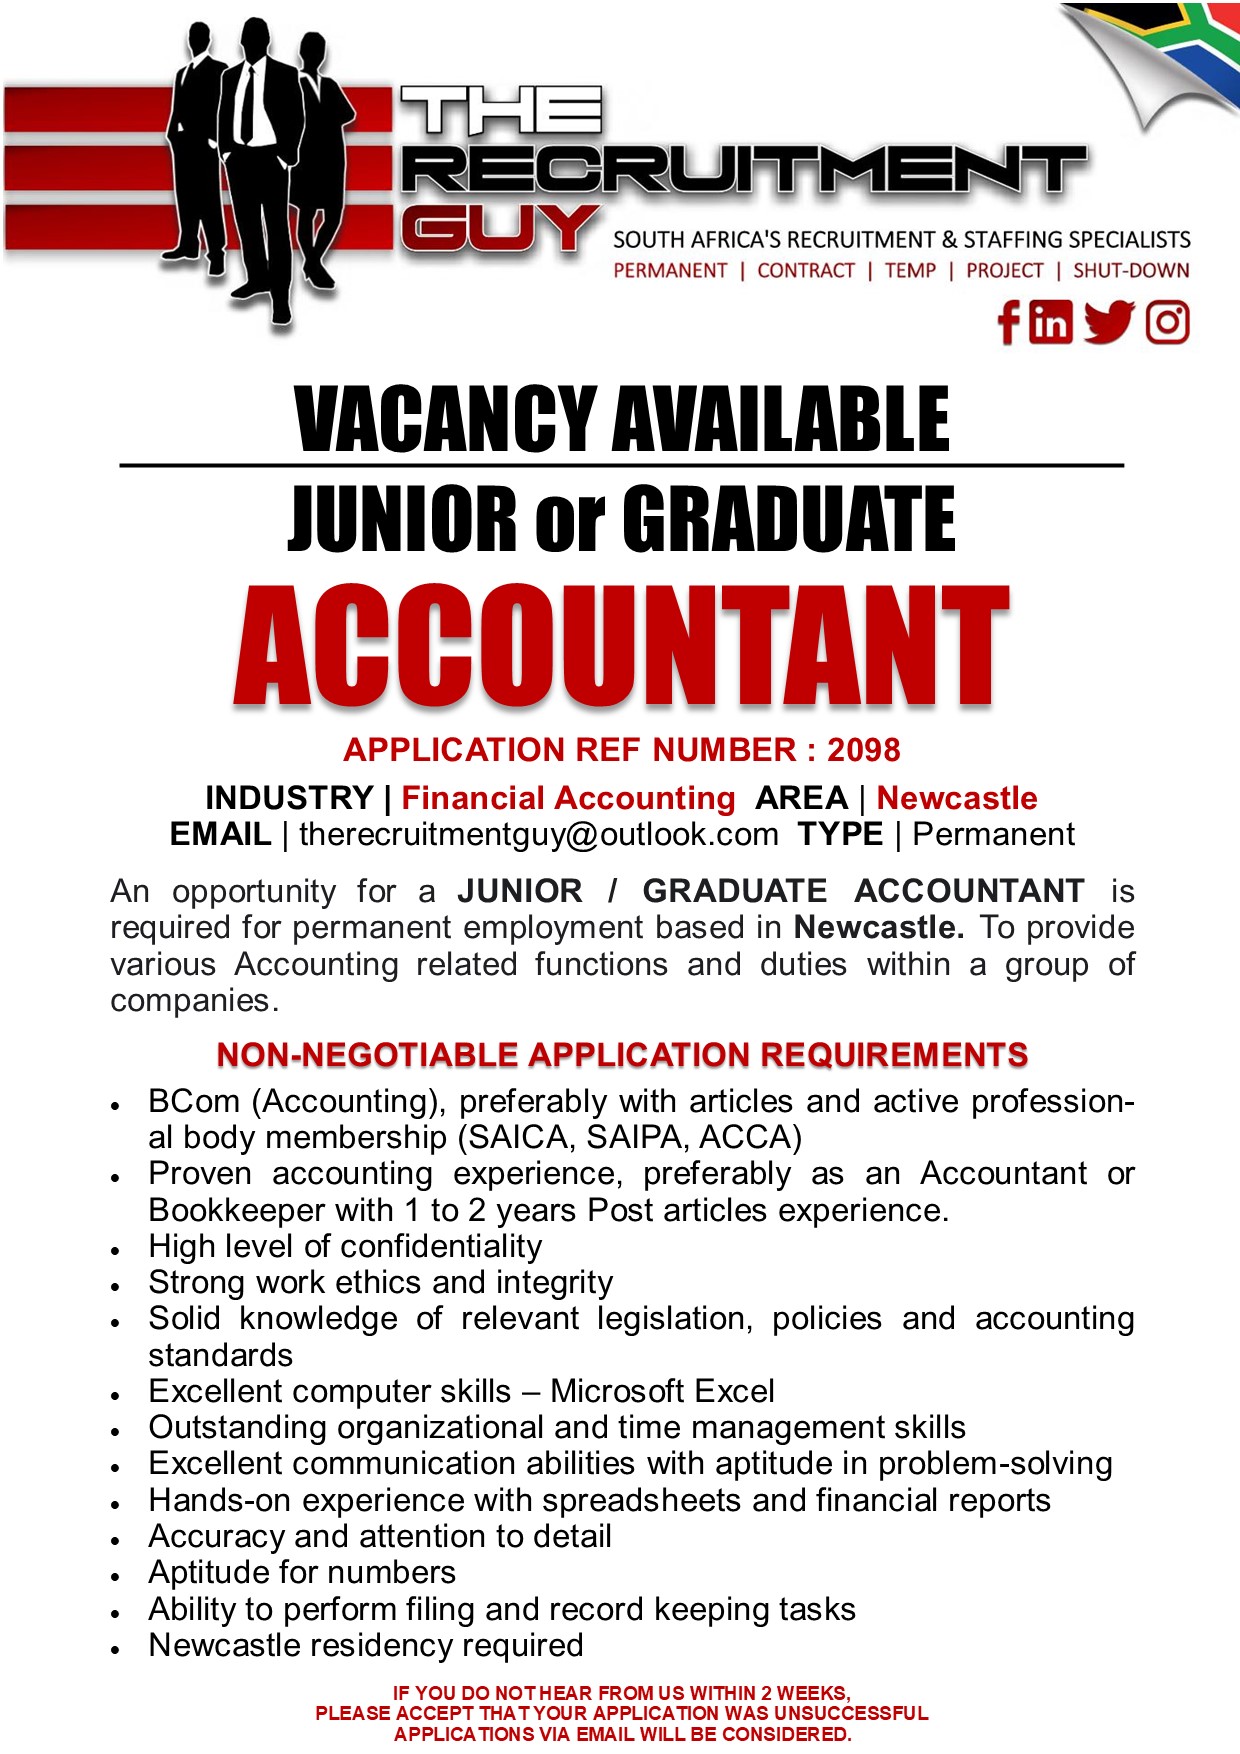 GUY SOUTH AFRICA'S RECRUITMENT &amp; STAFFING SPECIALISTS

PERMANENT | CONTRACT | TEMP | PROJECT | SHUT-DOWN

{ink JG]

VACANCY AVAILABLE
JUNIOR or GRADUATE

ACCOUNTANT

APPLICATION REF NUMBER : 2098

INDUSTRY | Financial Accounting AREA | Newcastle
EMAIL | therecruitmentguy@outlook.com TYPE | Permanent

An opportunity for a JUNIOR / GRADUATE ACCOUNTANT is
required for permanent employment based in Newcastle. To provide
various Accounting related functions and duties within a group of
companies.

NON-NEGOTIABLE APPLICATION REQUIREMENTS

« BCom (Accounting), preferably with articles and active profession-
al body membership (SAICA, SAIPA, ACCA)
« Proven accounting experience, preferably as an Accountant or
Bookkeeper with 1 to 2 years Post articles experience.
« High level of confidentiality
« Strong work ethics and integrity
. Solid knowledge of relevant legislation, policies and accounting
standards
Excellent computer skills — Microsoft Excel
Outstanding organizational and time management skills
Excellent communication abilities with aptitude in problem-solving
Hands-on experience with spreadsheets and financial reports
Accuracy and attention to detail
Aptitude for numbers
Ability to perform filing and record keeping tasks
Newcastle residency required
IF YOU DO NOTHEAR FROM US WITHIN 2 WEEKS,

PLEASE ACCEPT THAT YOUR APPLICATION WAS UNSUCCESSFUL
APPLICATIONS VIA EMAIL WILL BE CONSIDERED.